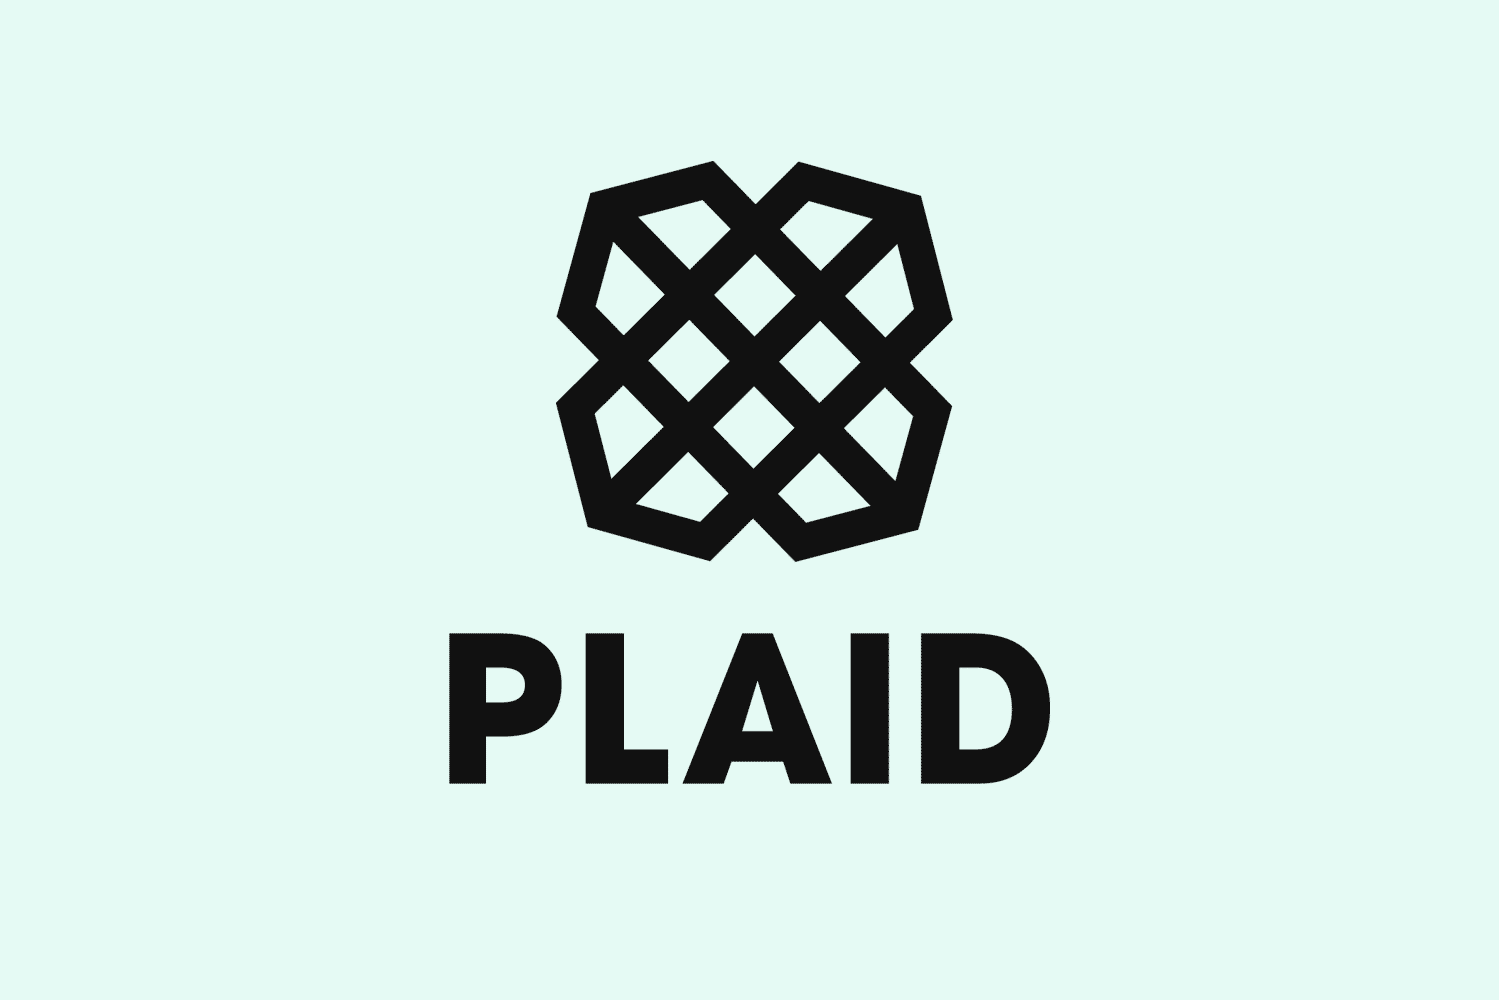 Fintech start-up Plaid raises $250 million at $2.7 billion valuation, adds Mary Meeker to board